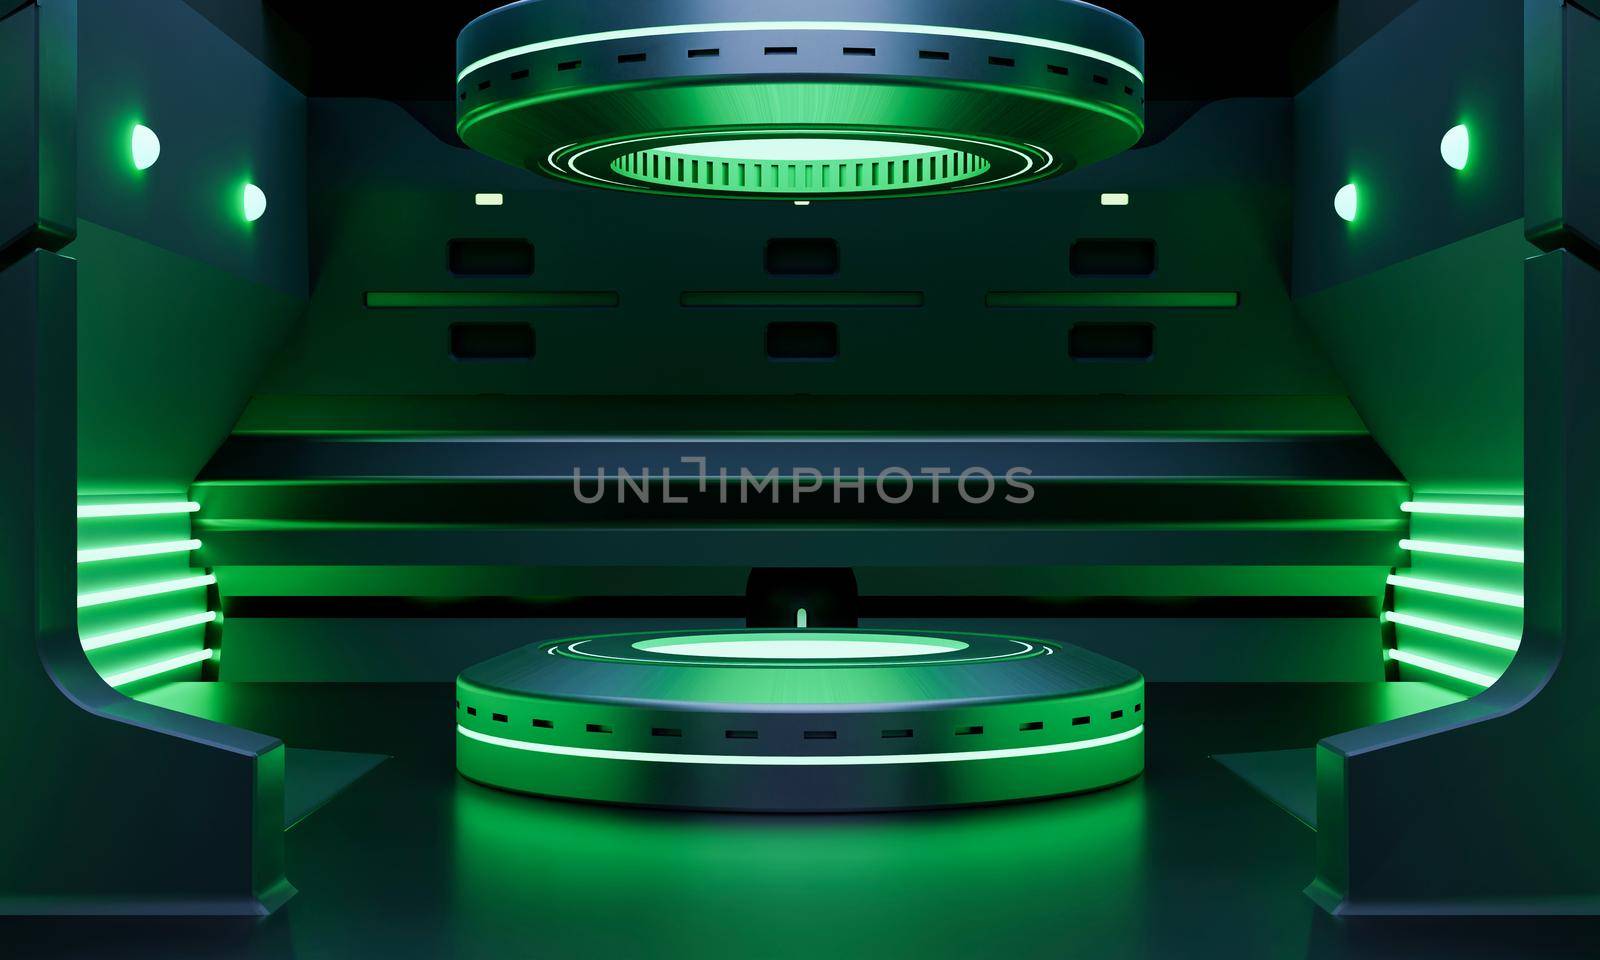 Cyberpunk sci-fi product podium showcase in spaceship with green neon lighting background. Technology and object concept. 3D illustration rendering by MiniStocker